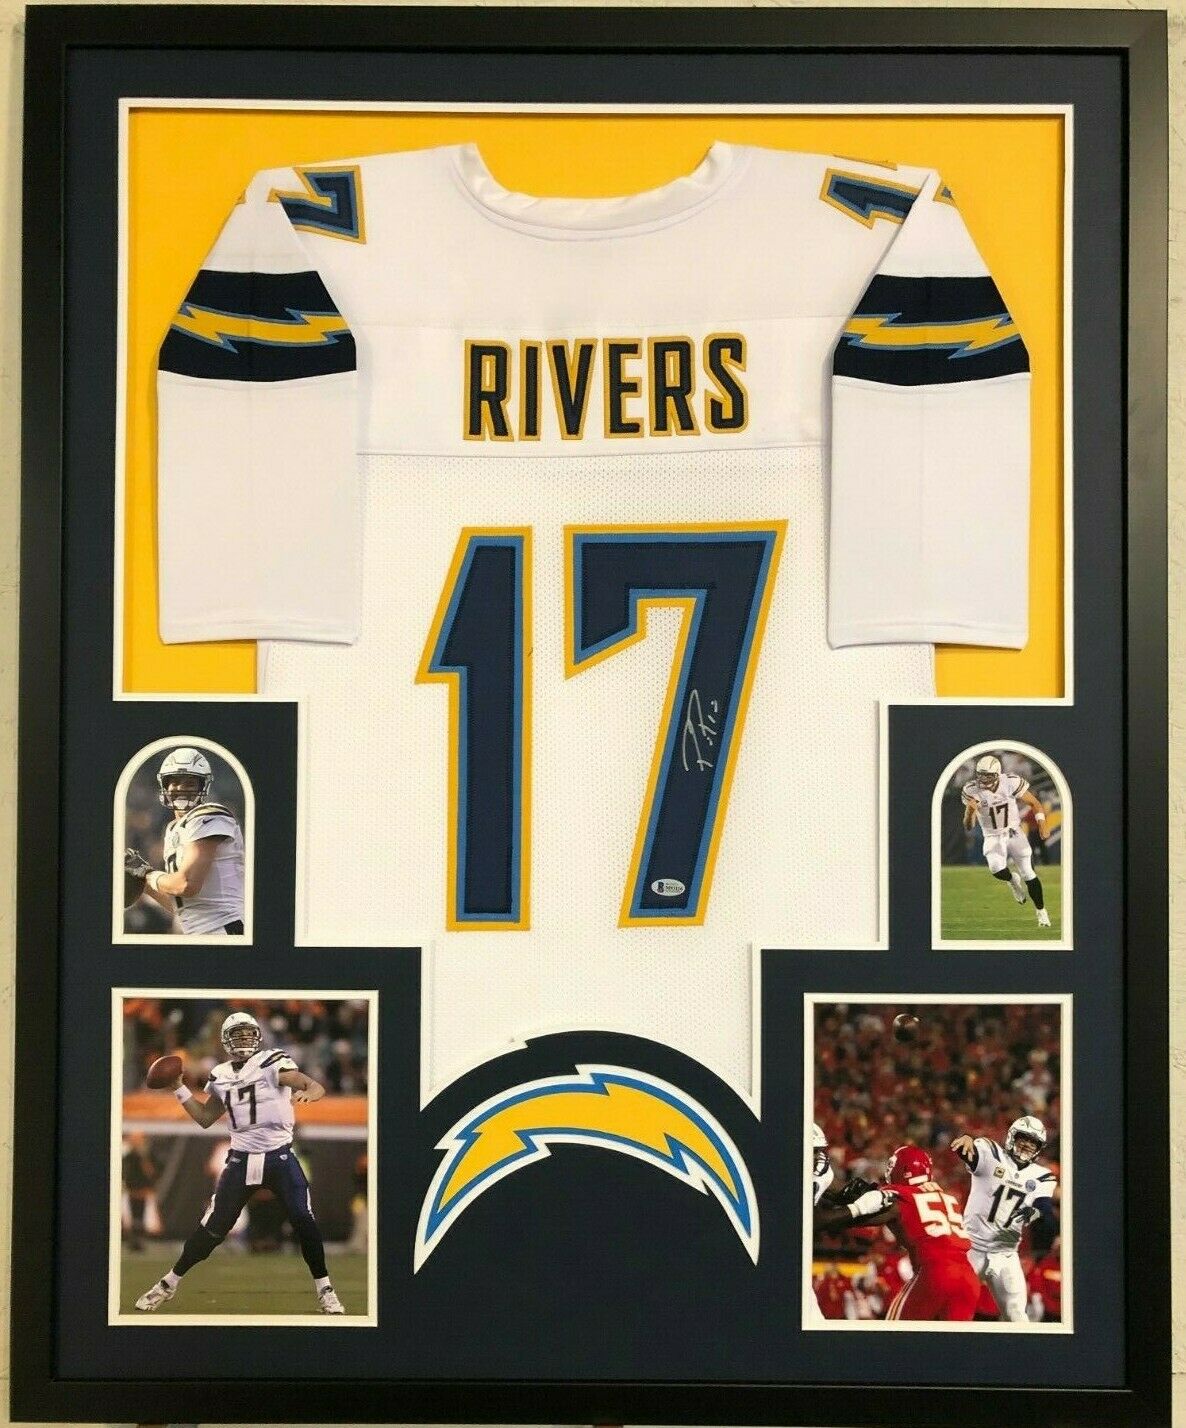 san diego chargers philip rivers jersey